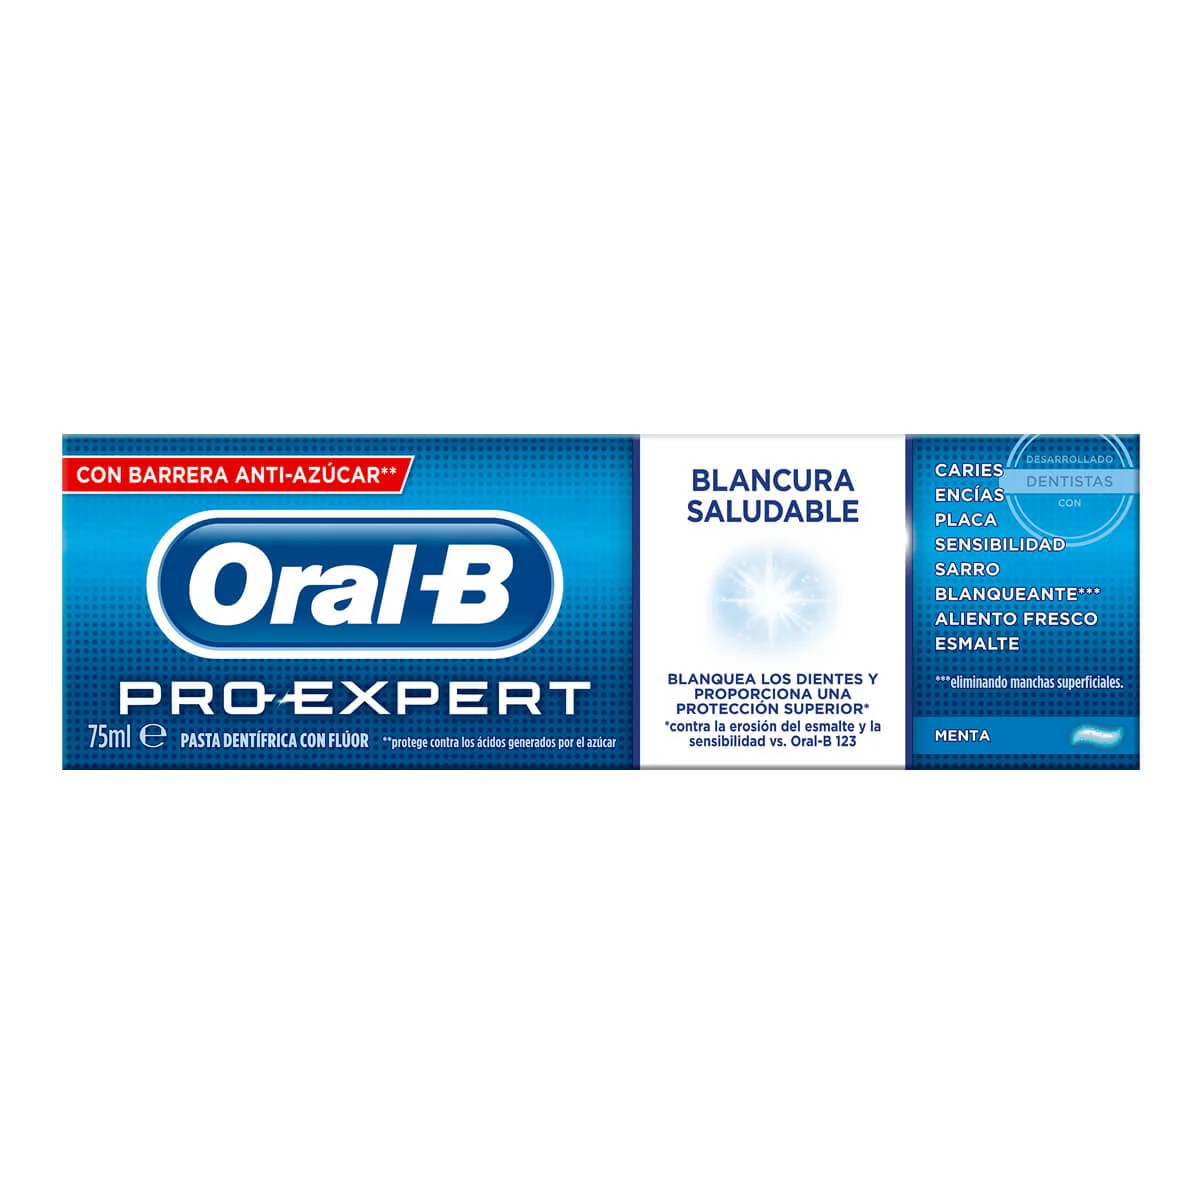 Oral-B Pro-Expert Blancura Saludable undefined